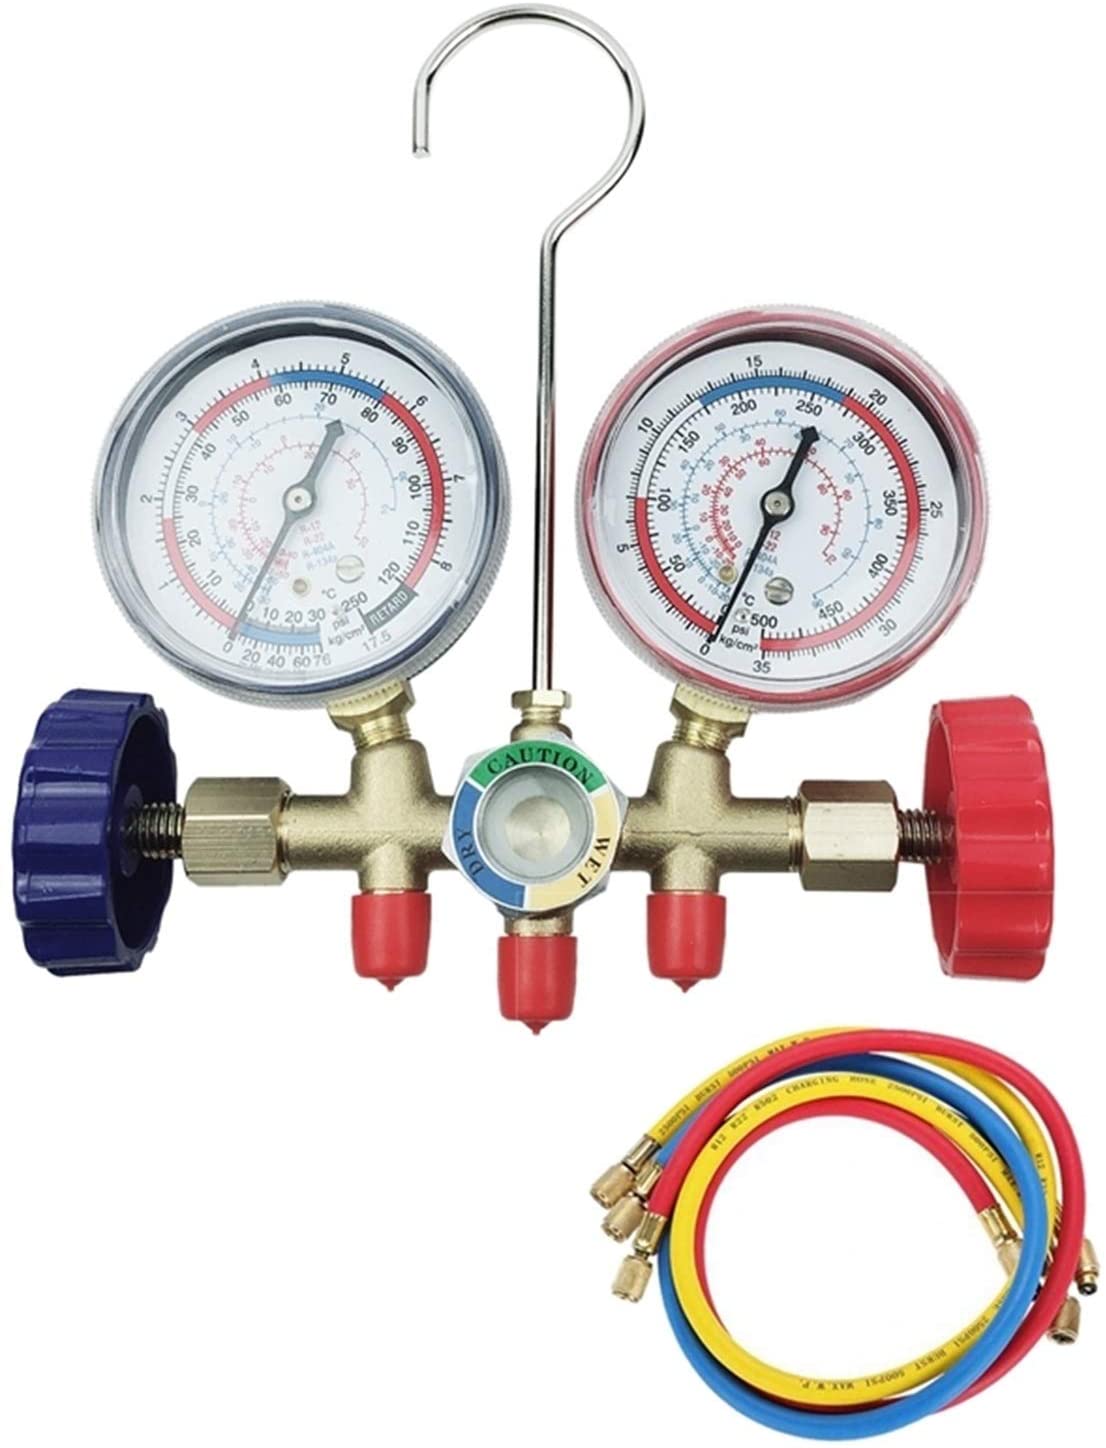 XIAOFANG Fangxia Store Air Conditioner Pressure Gauge Double Meter Car Home Fixed Inverter Pressure Metering of Refrigerant Filling (Color Name : Rose red) (Rose red)